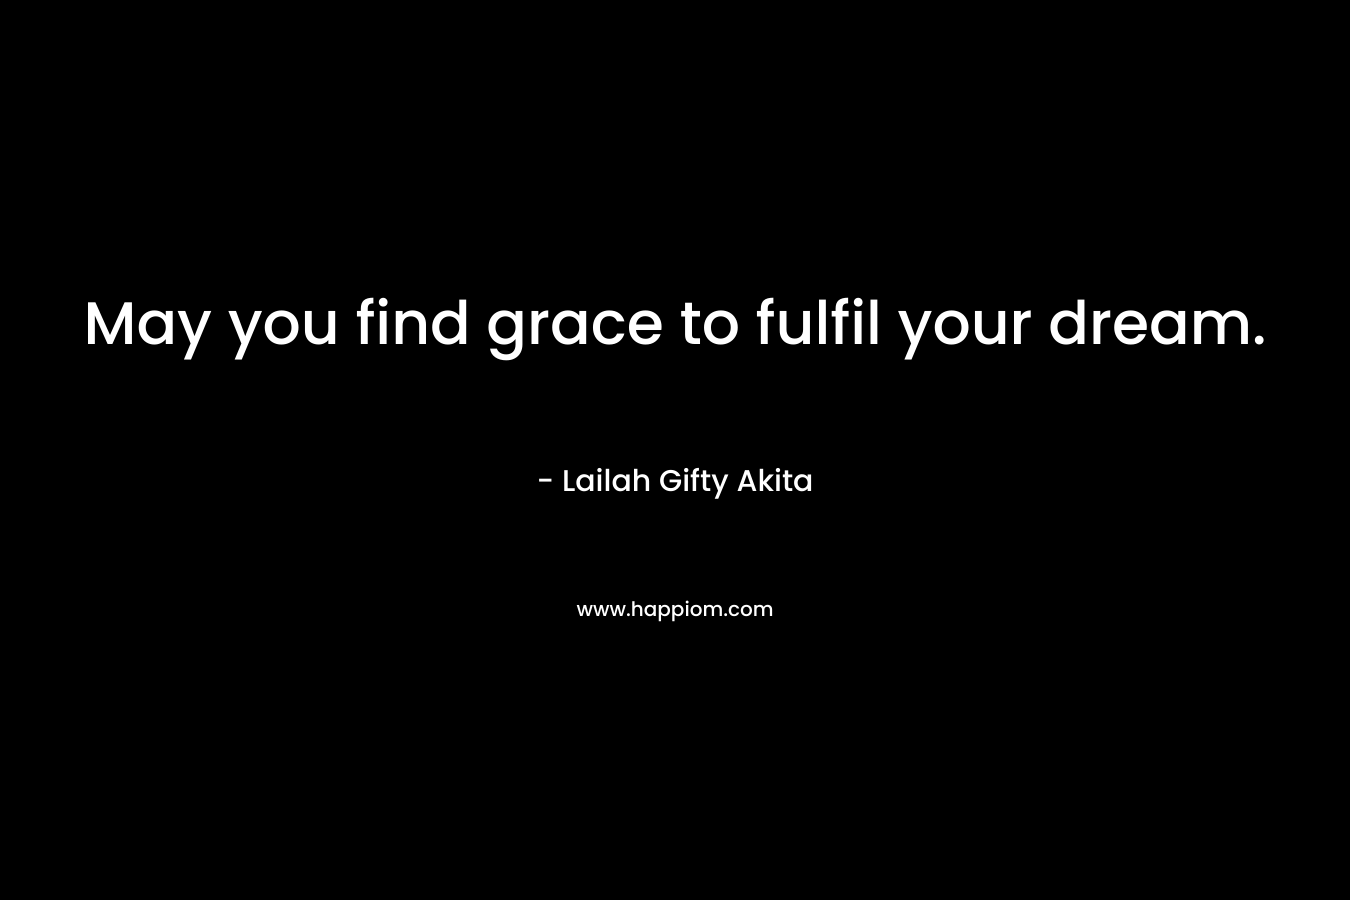 May you find grace to fulfil your dream.